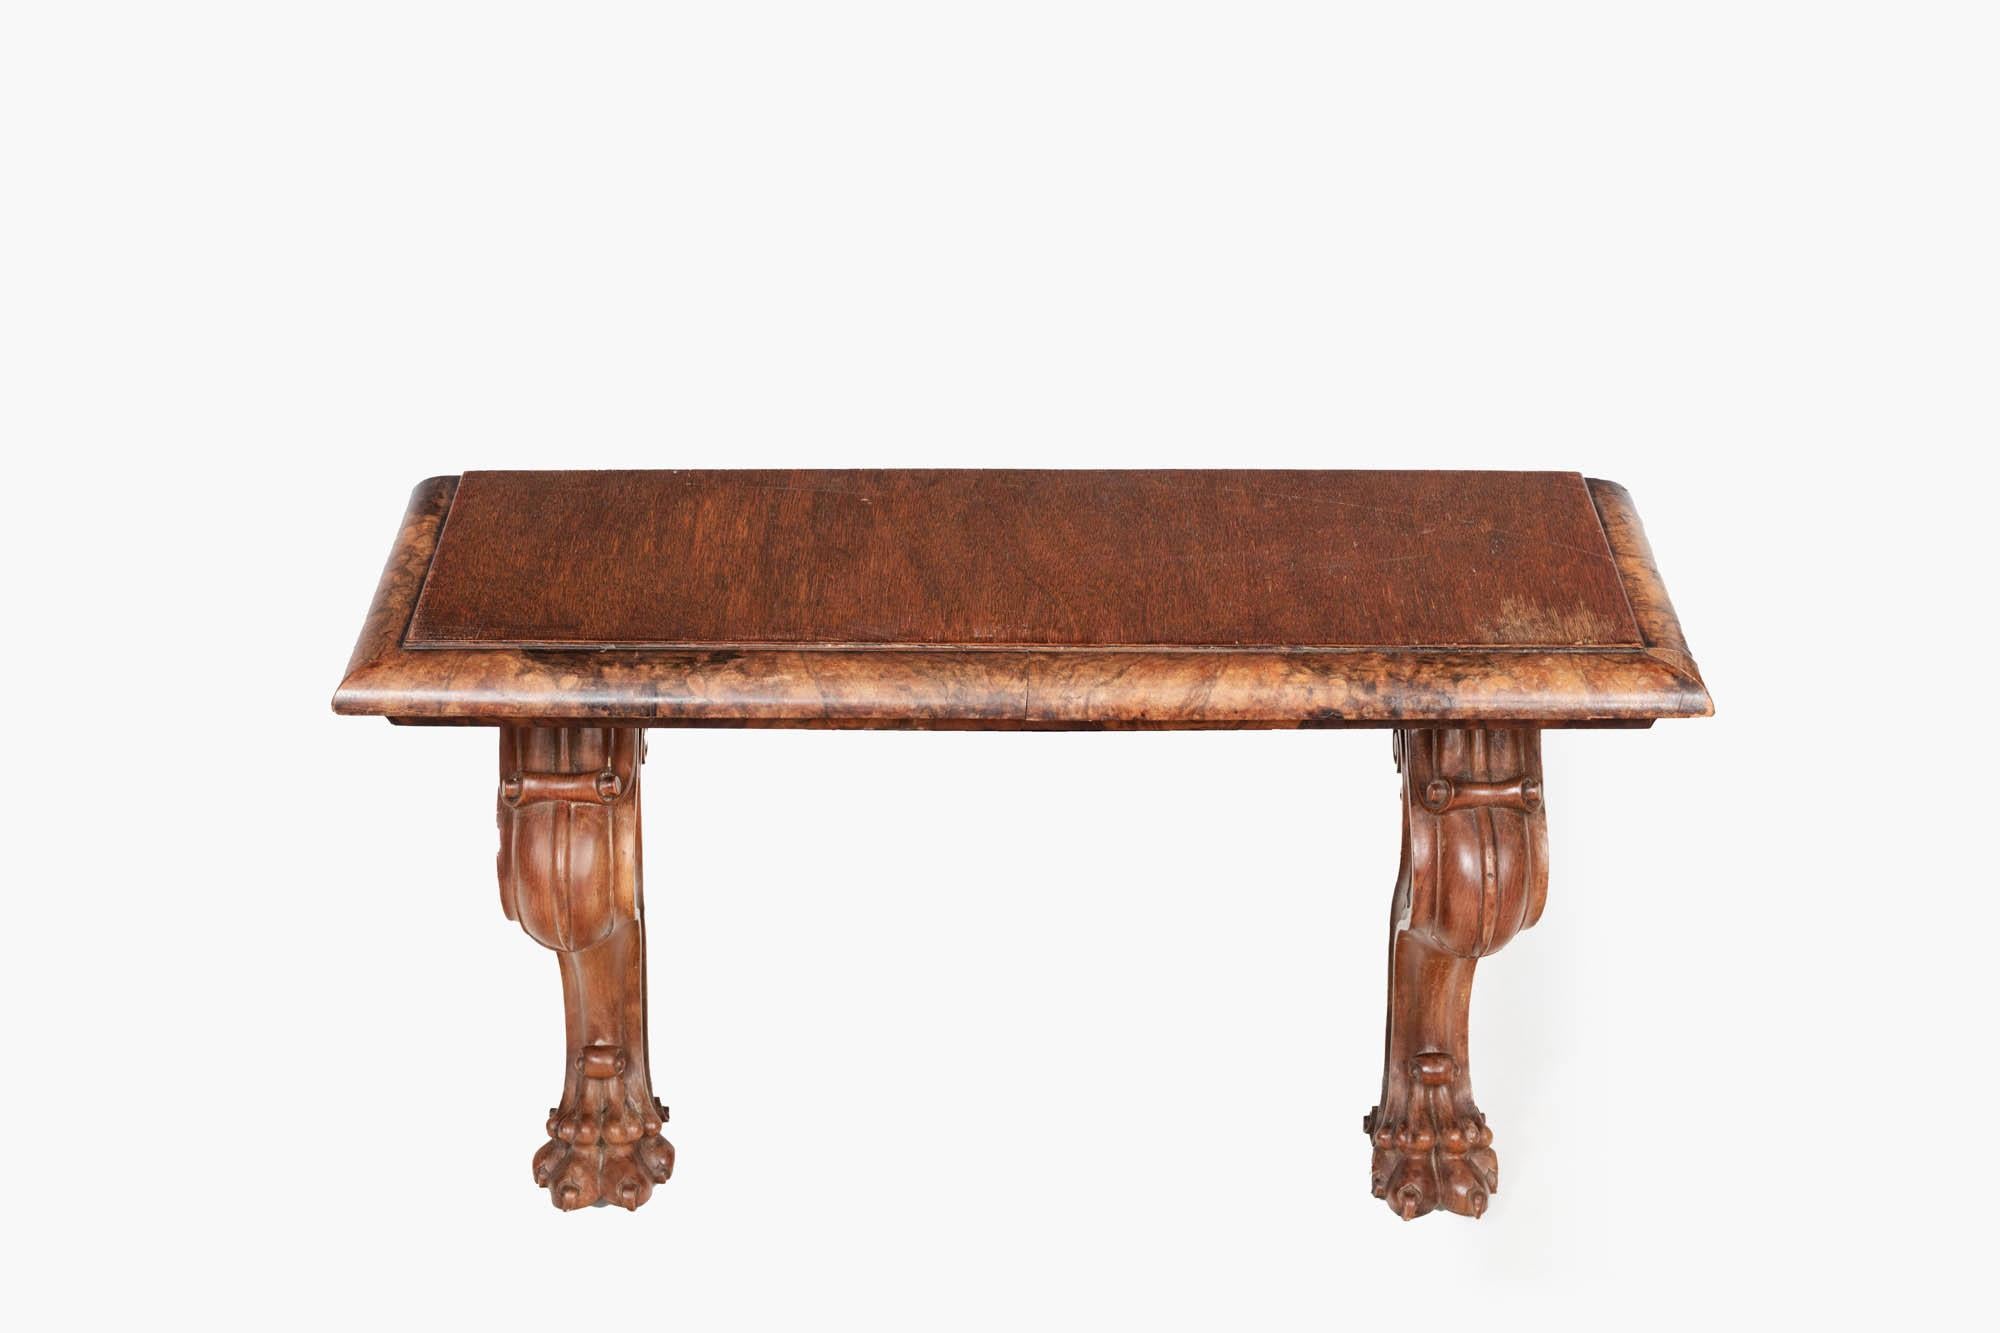 19th century low console table with crossbanded top and a carved walnut edge. The double pedestal cabriole legs terminate in carved hairy paw feet.

Console tables were first introduced in France in the 17th century as a rectangular slab supported